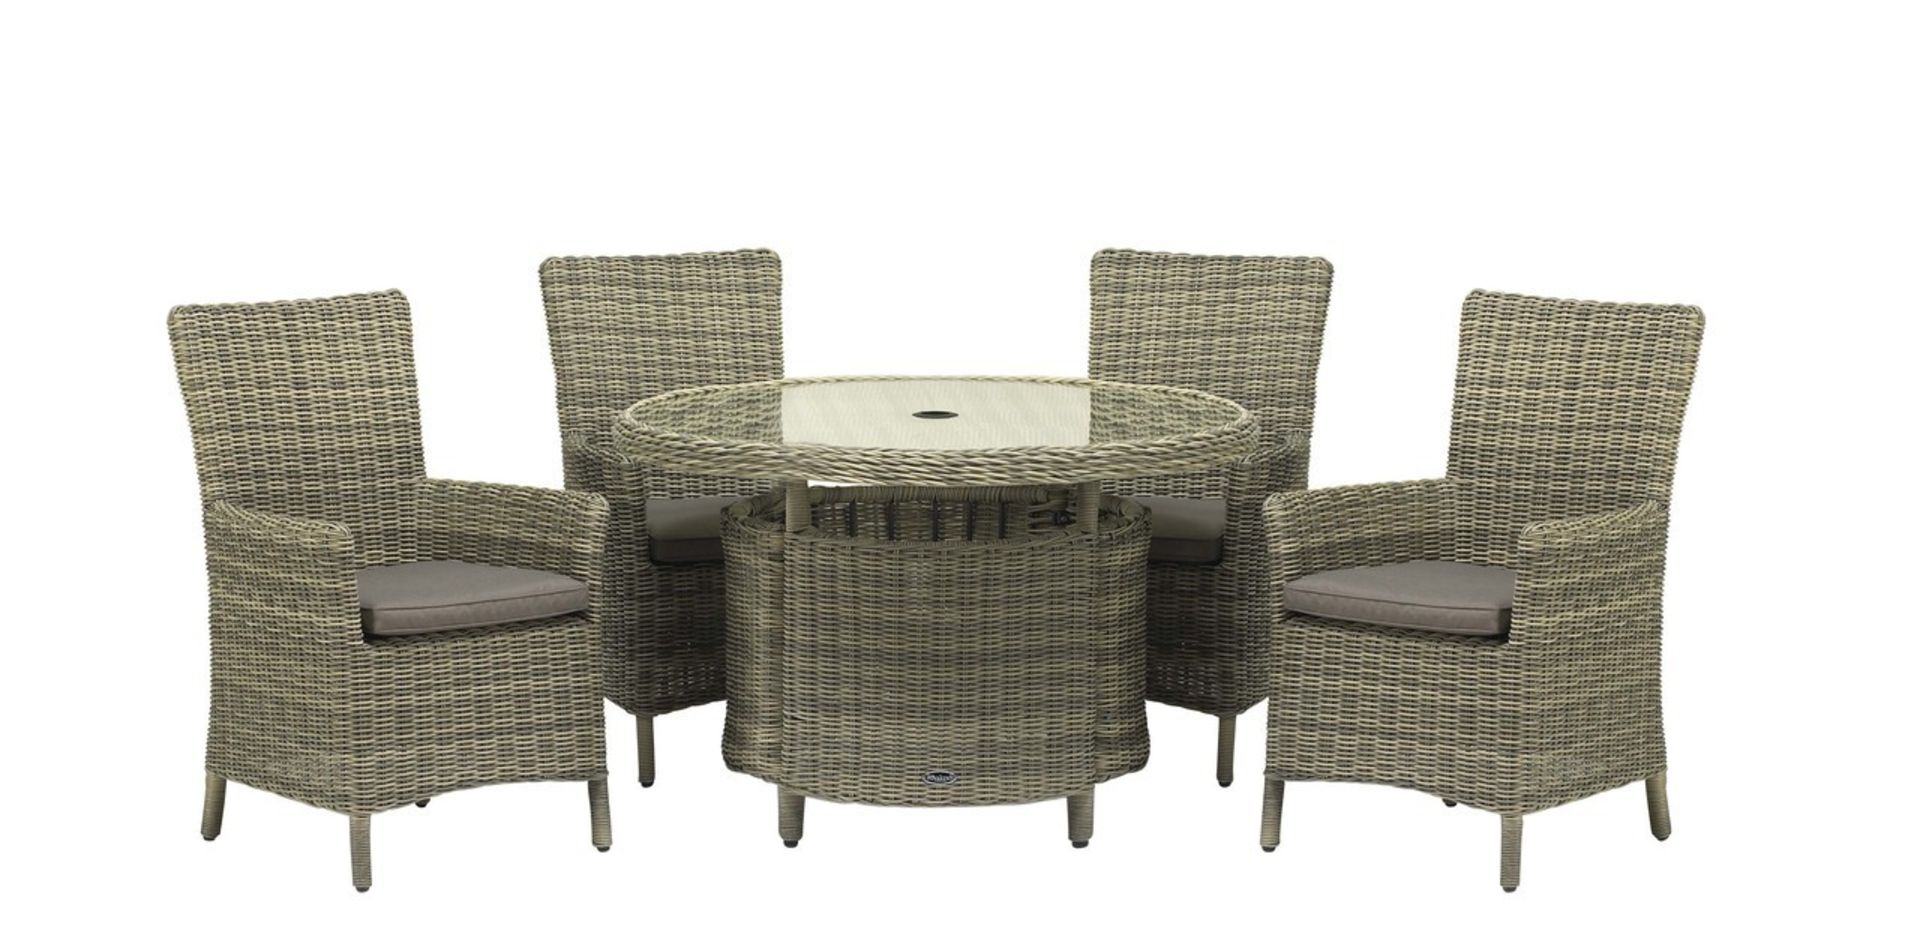 V Brand New Modena 110 Table With Four Carver Chairs - 5mm Full Round Weave (Stock Usually Available